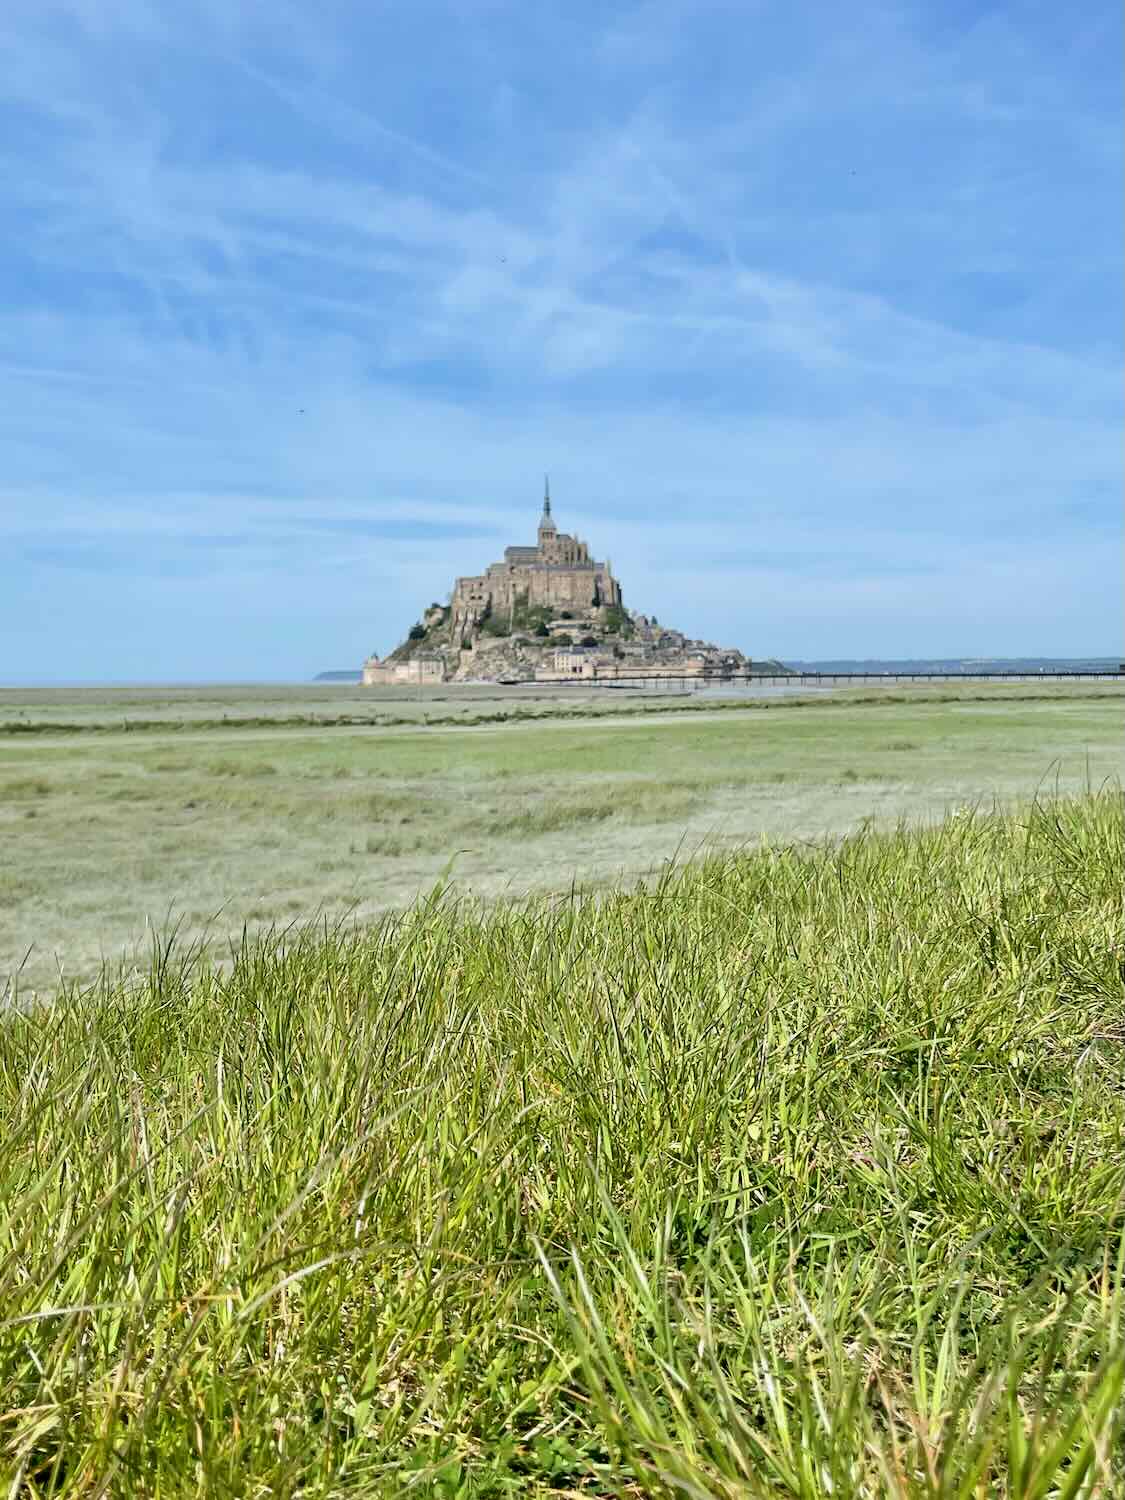 Distant view of Mont Saint Michel from a grassy field, emphasizing the vast scale and isolated position of the island.